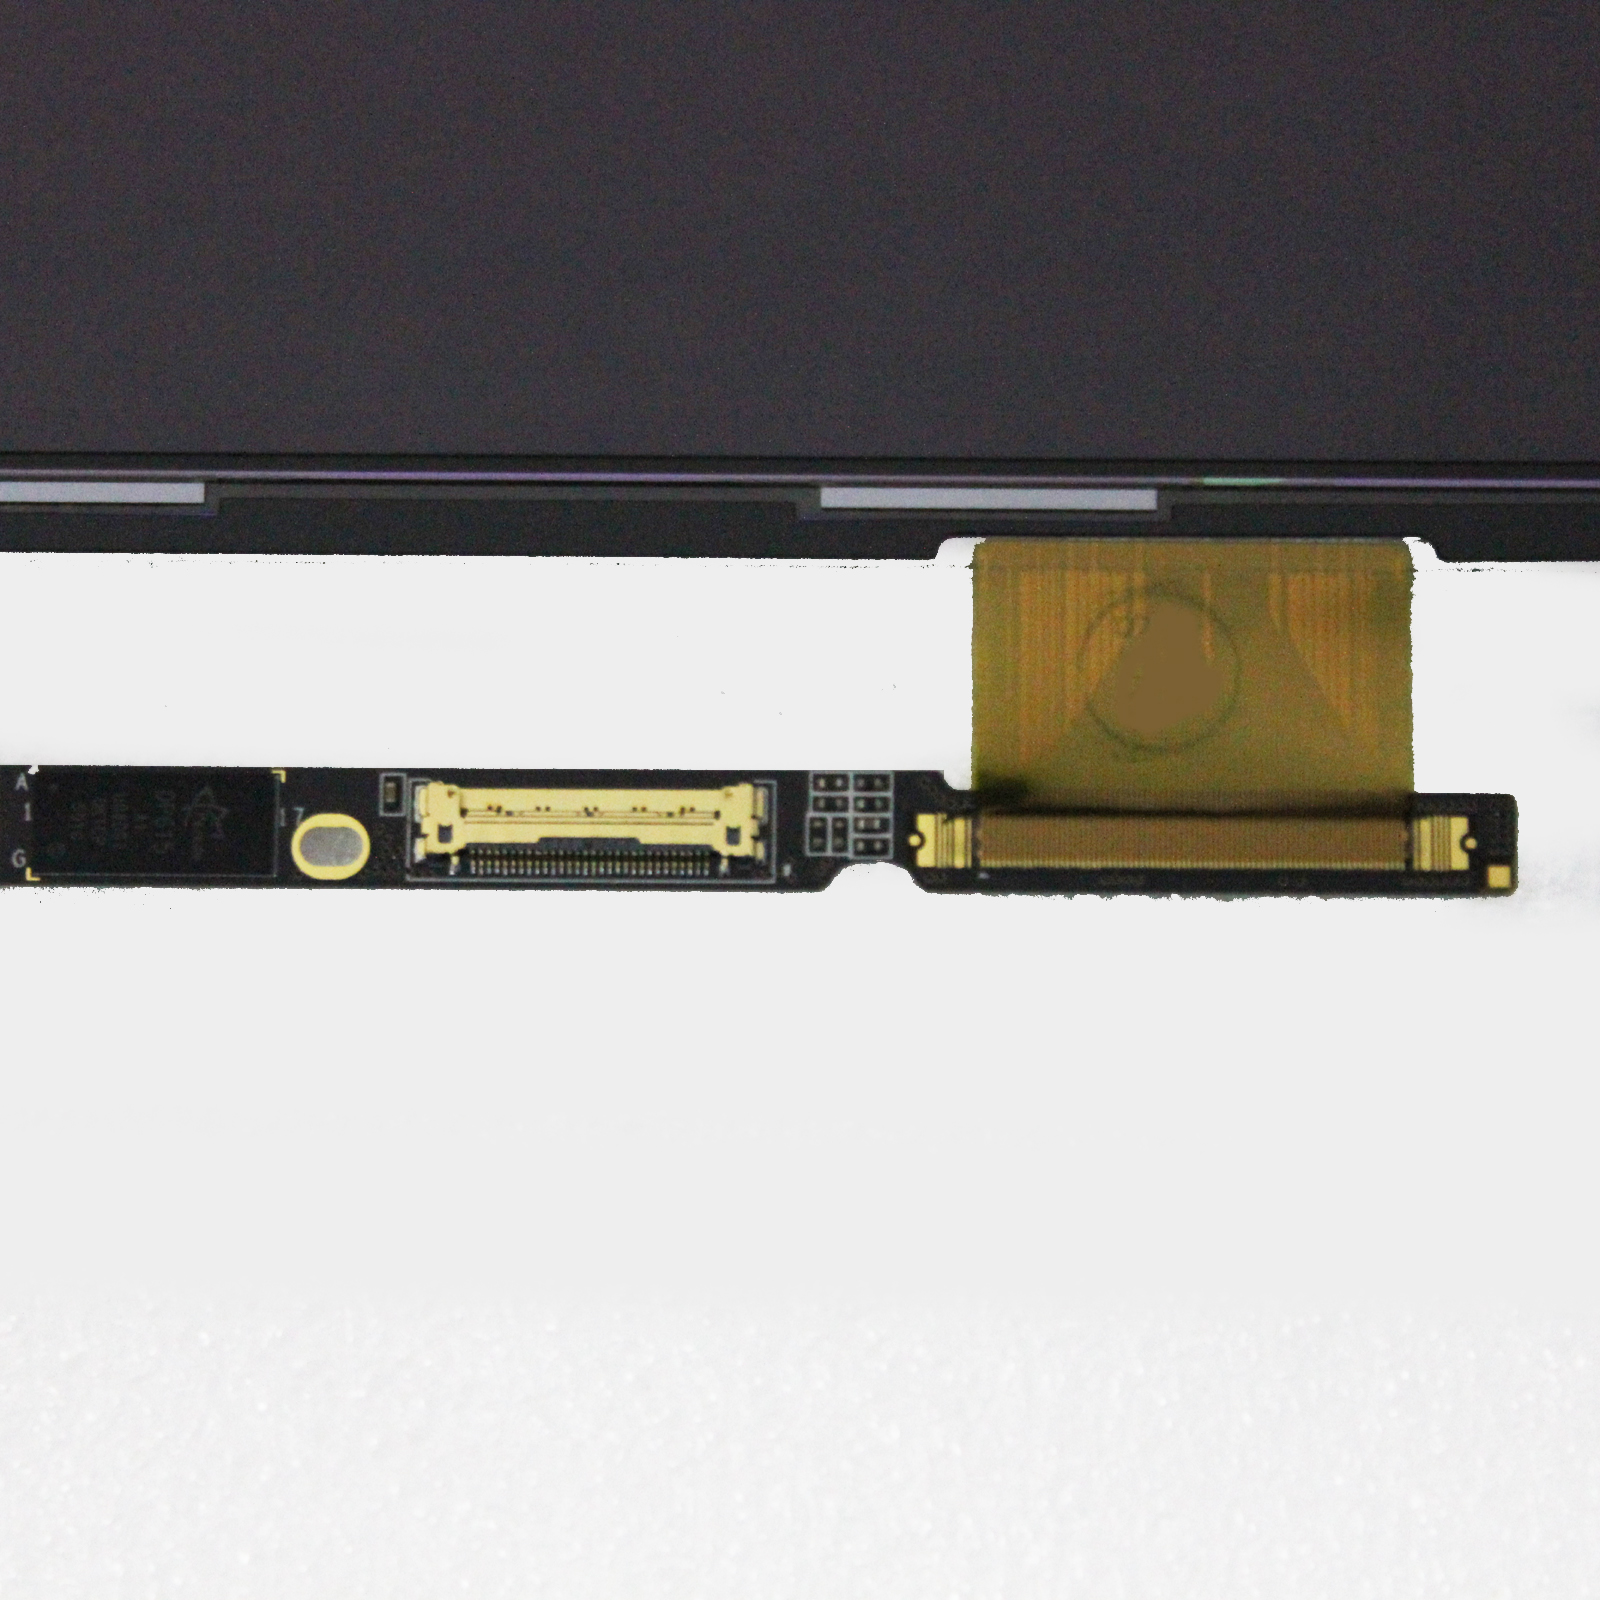 Kreplacement FOR MACBOOK AIR 13" A1369 A1466 SCREEN LED LCD panel display LSN133BT01-A01 LTH133BT01 LP133WP1 TJA1 A3